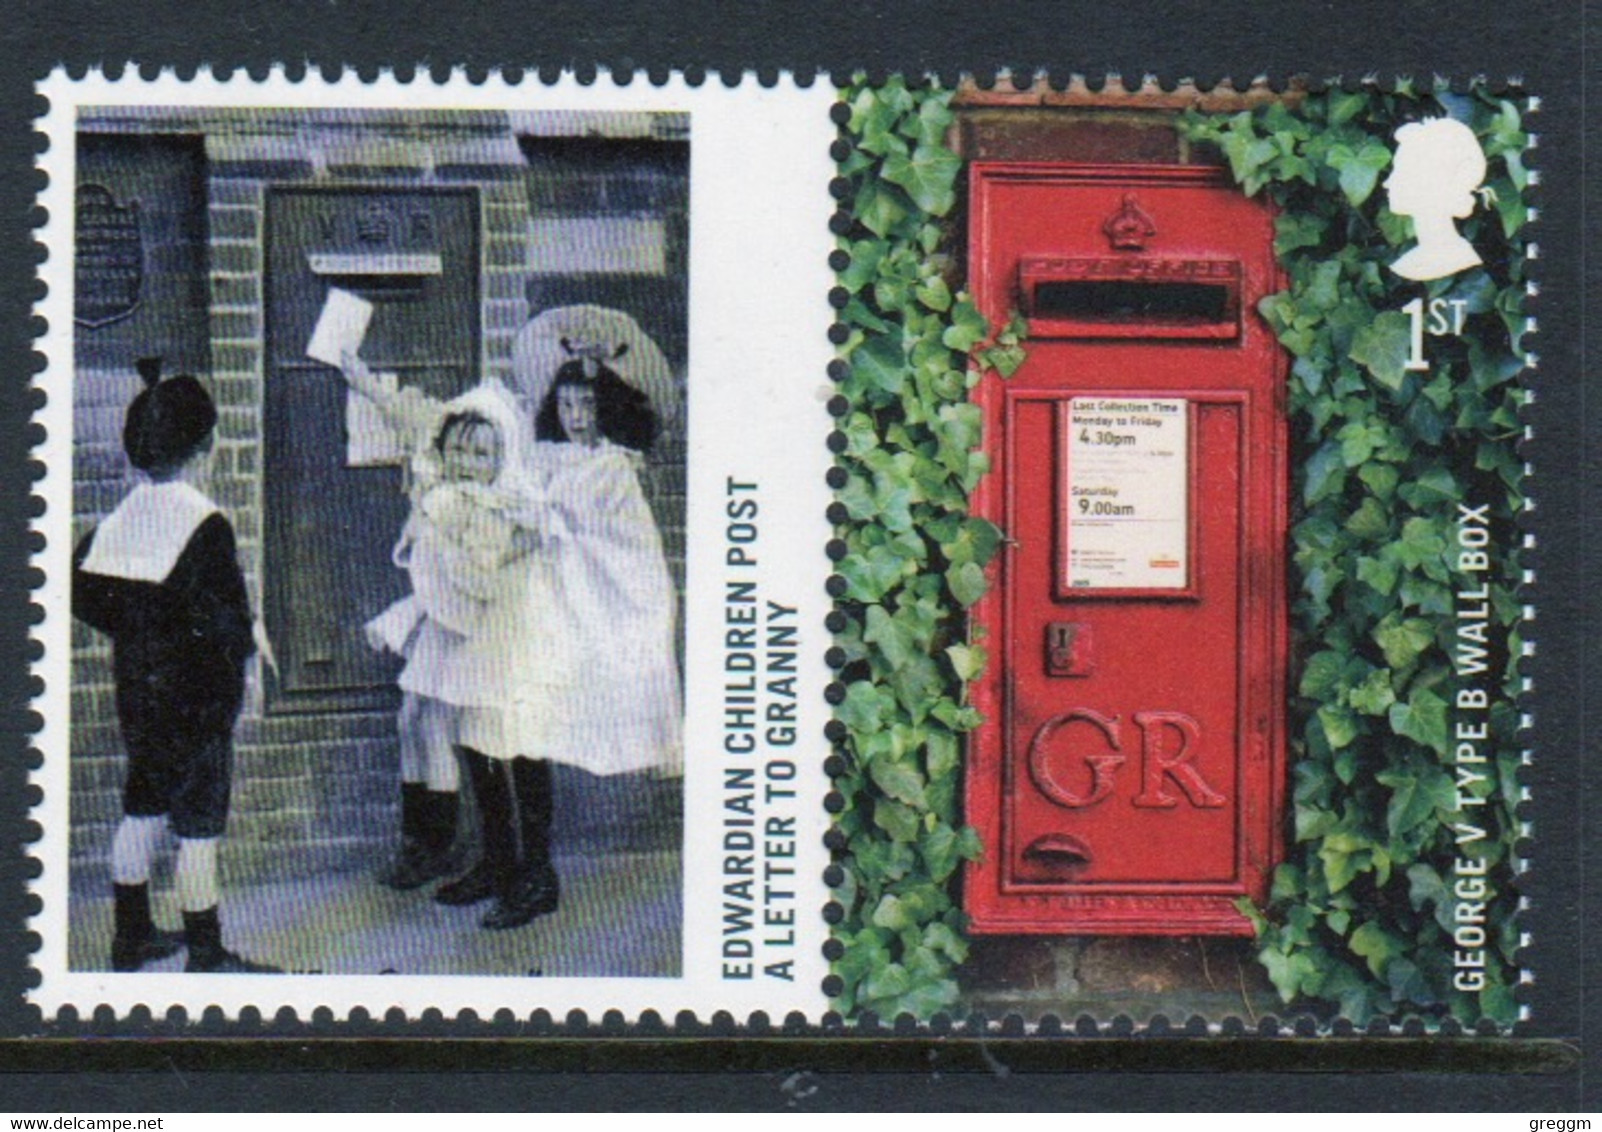 Great Britain 2009 Single 1st Smiler Sheet Commemorative Stamp With Labels From The Post Boxes Set In Unmounted Mint. - Francobolli Personalizzati